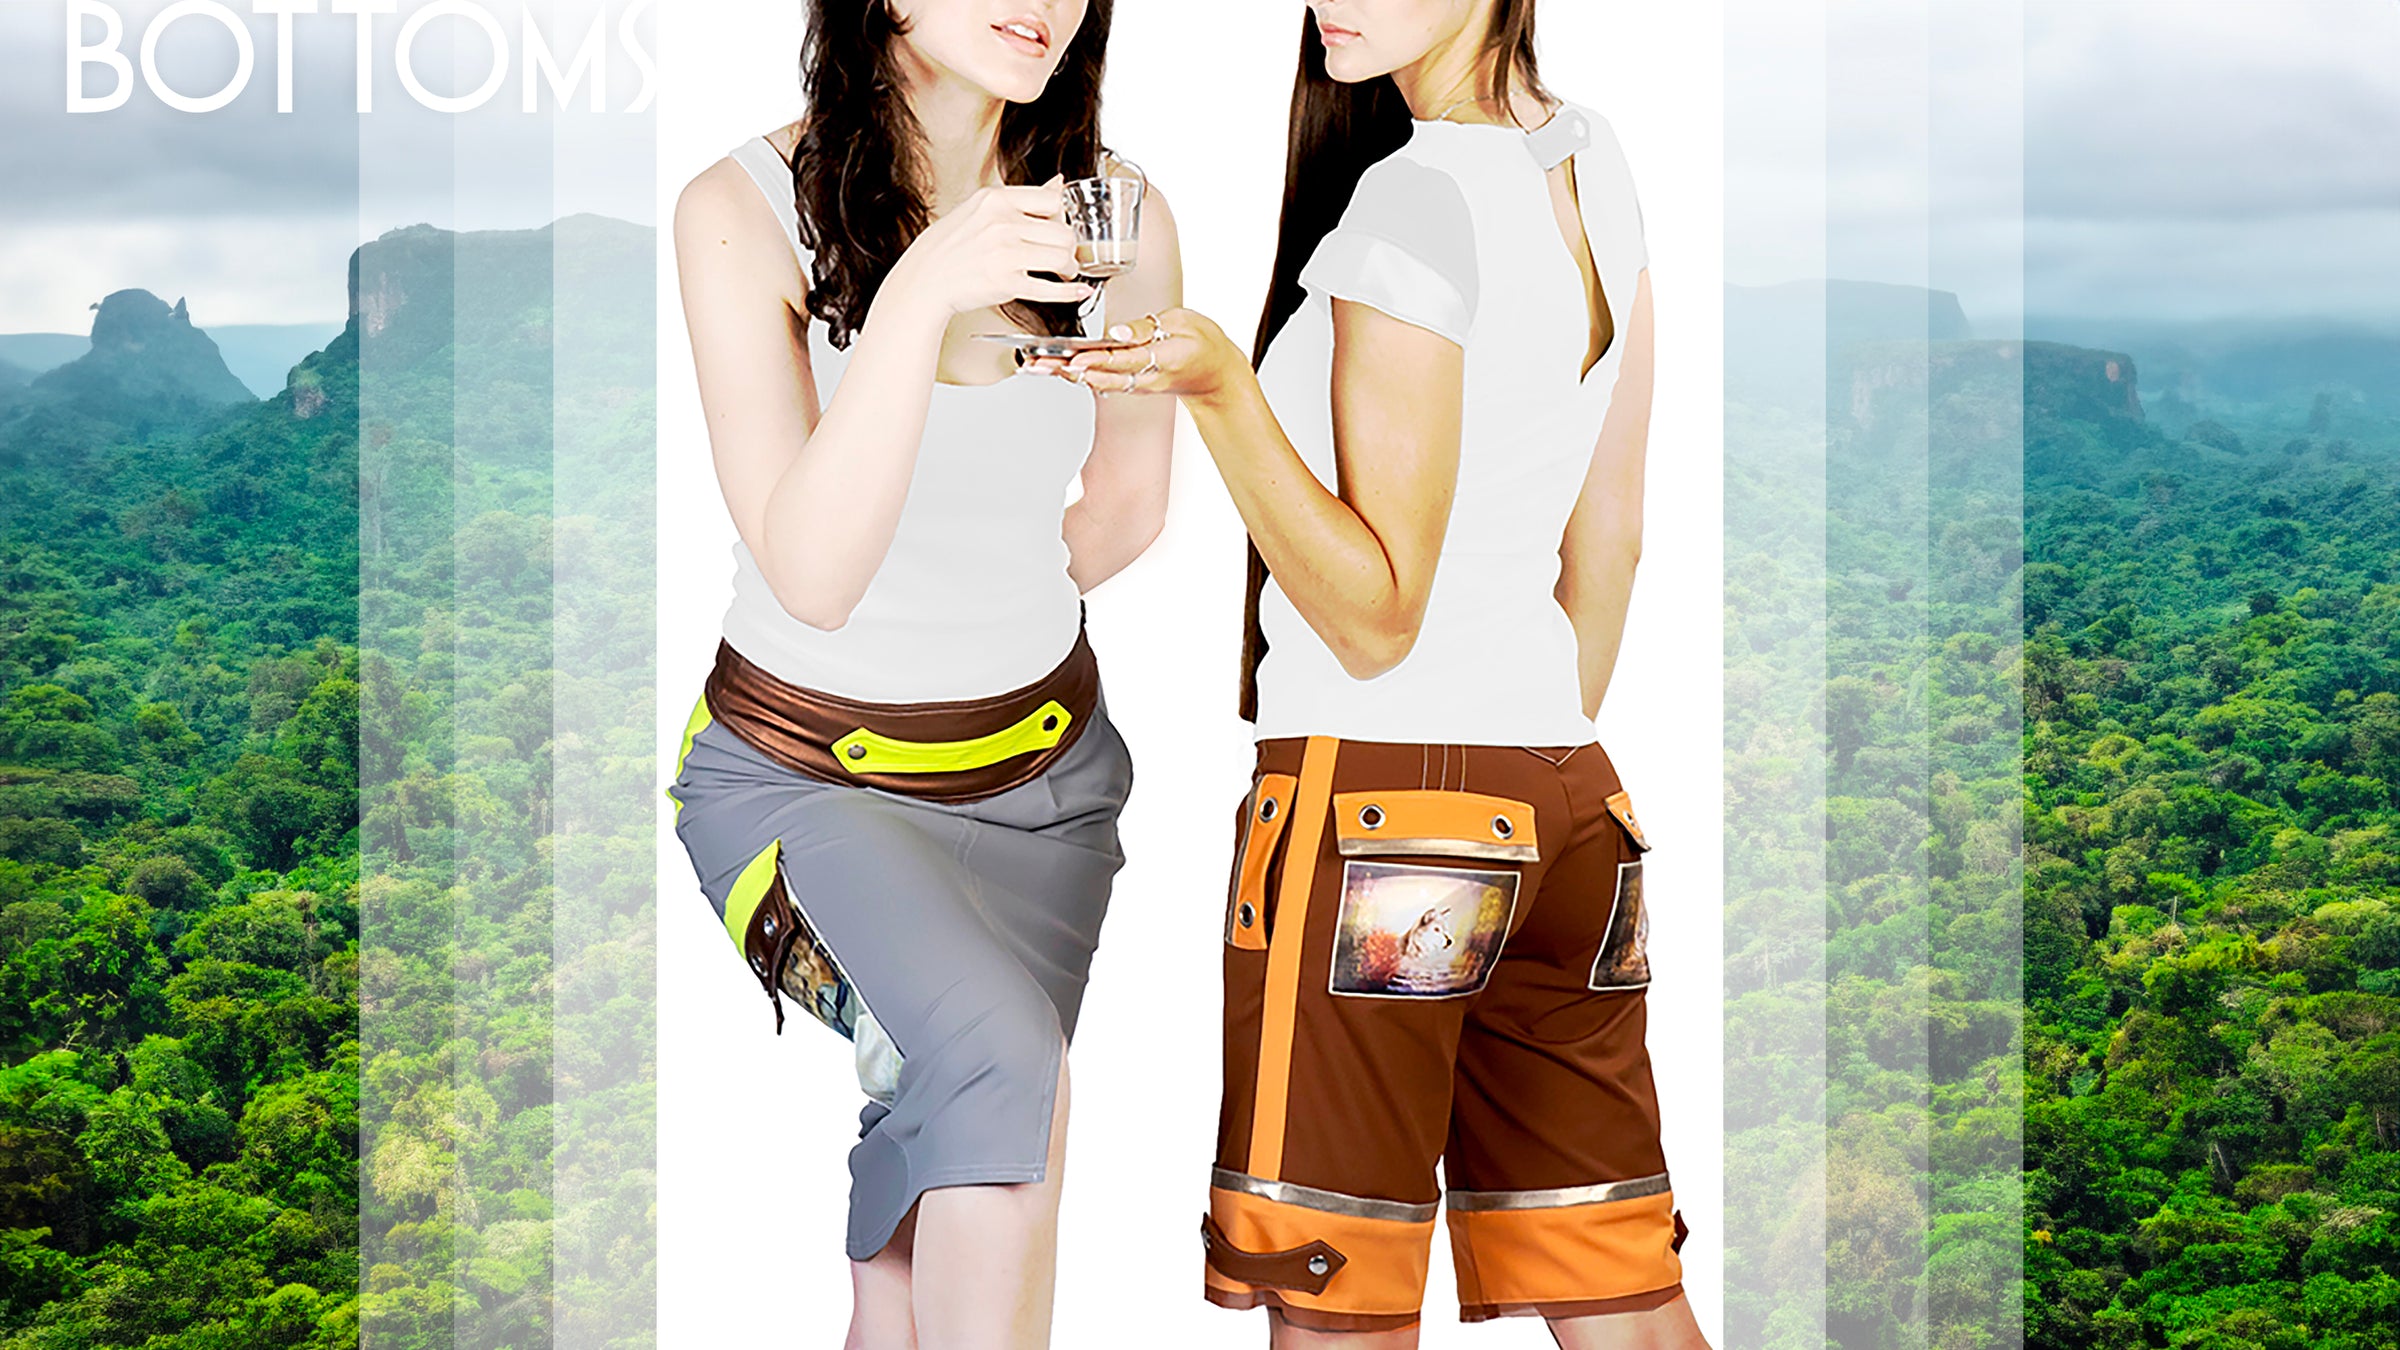 2 models against rainforest background showing off the gray with lime and copper accent pencil skirt and the other wearing brown with orange and copper accent shorts sipping espresso